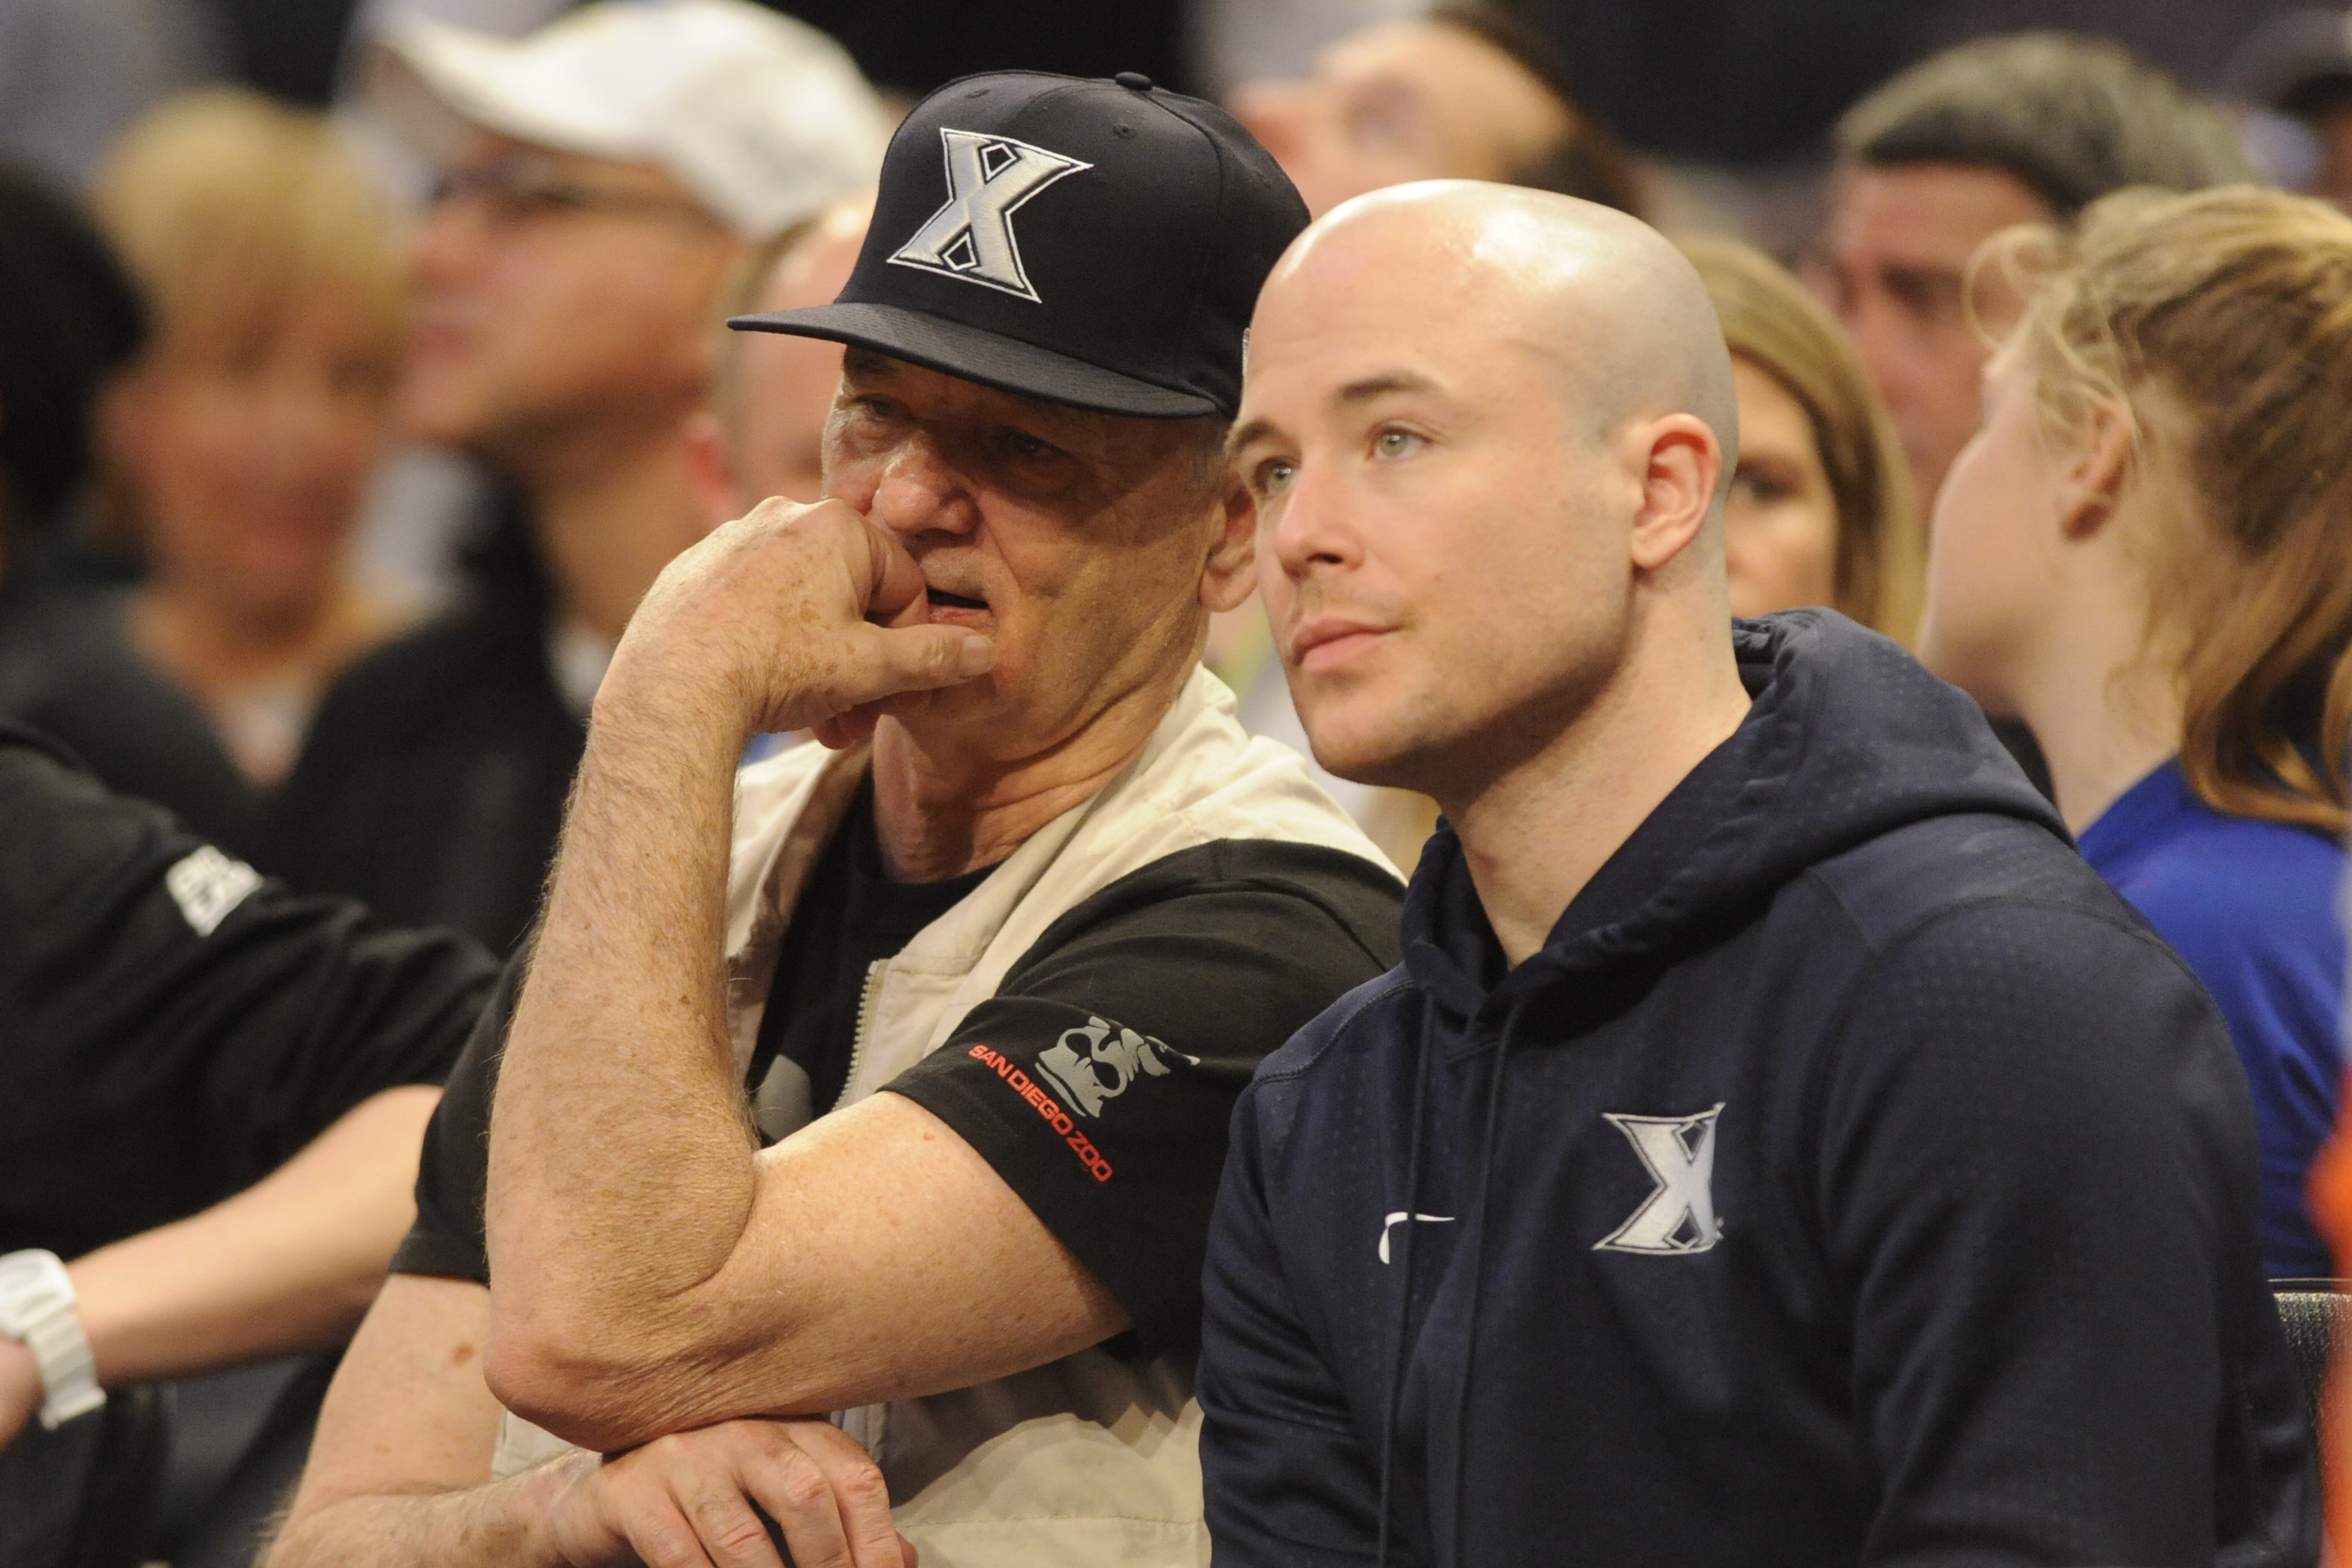 Bill Murray and Luke Murray, at a quarterfinal game between Seton Hall Pirates and Creighton Bluejays at Madison Square Garden, New York, NYC, on March 10, 2016. | Source: Getty Images